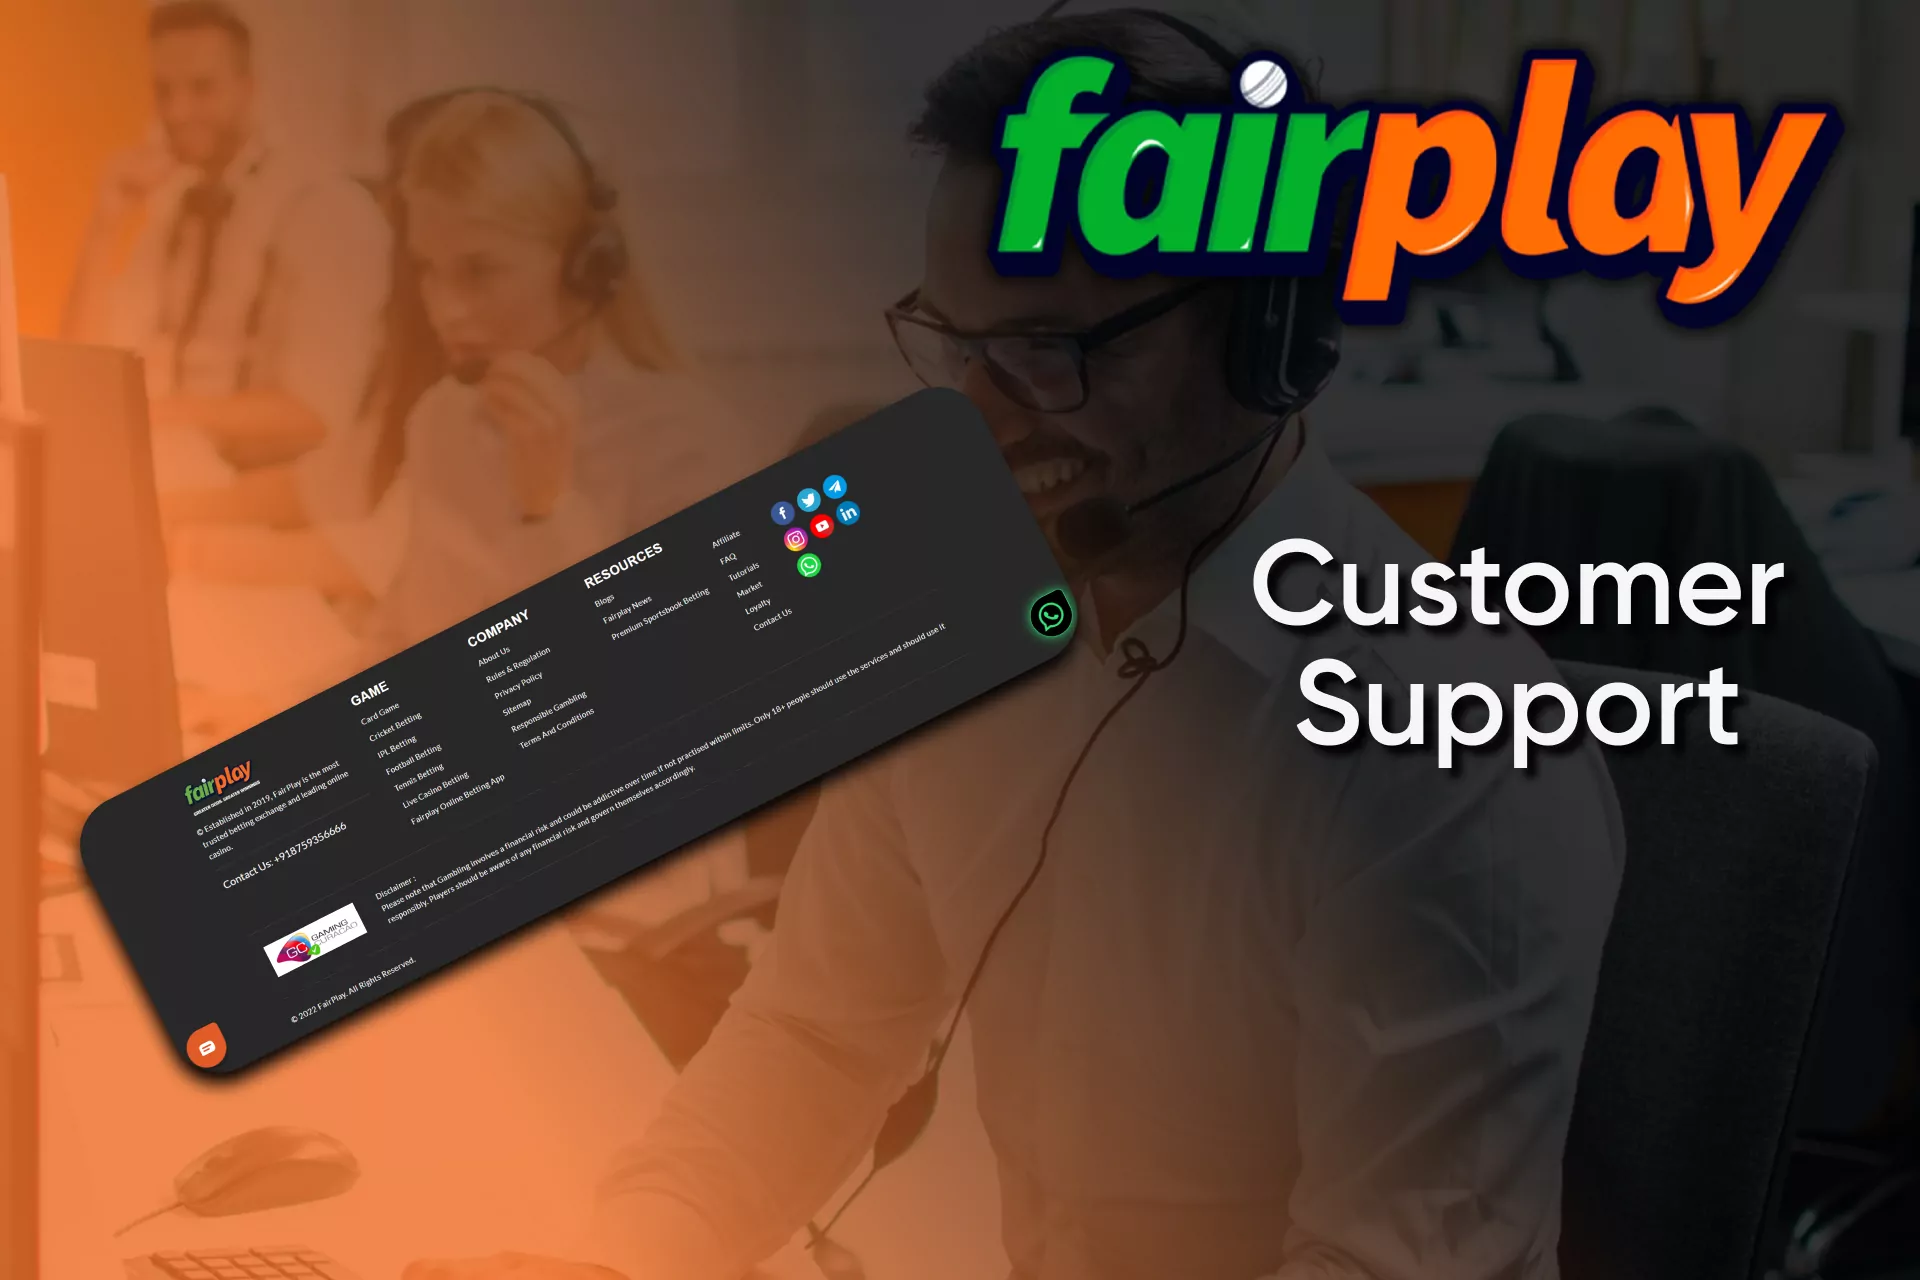 If you have questions about Fairplay, you can ask customer support.